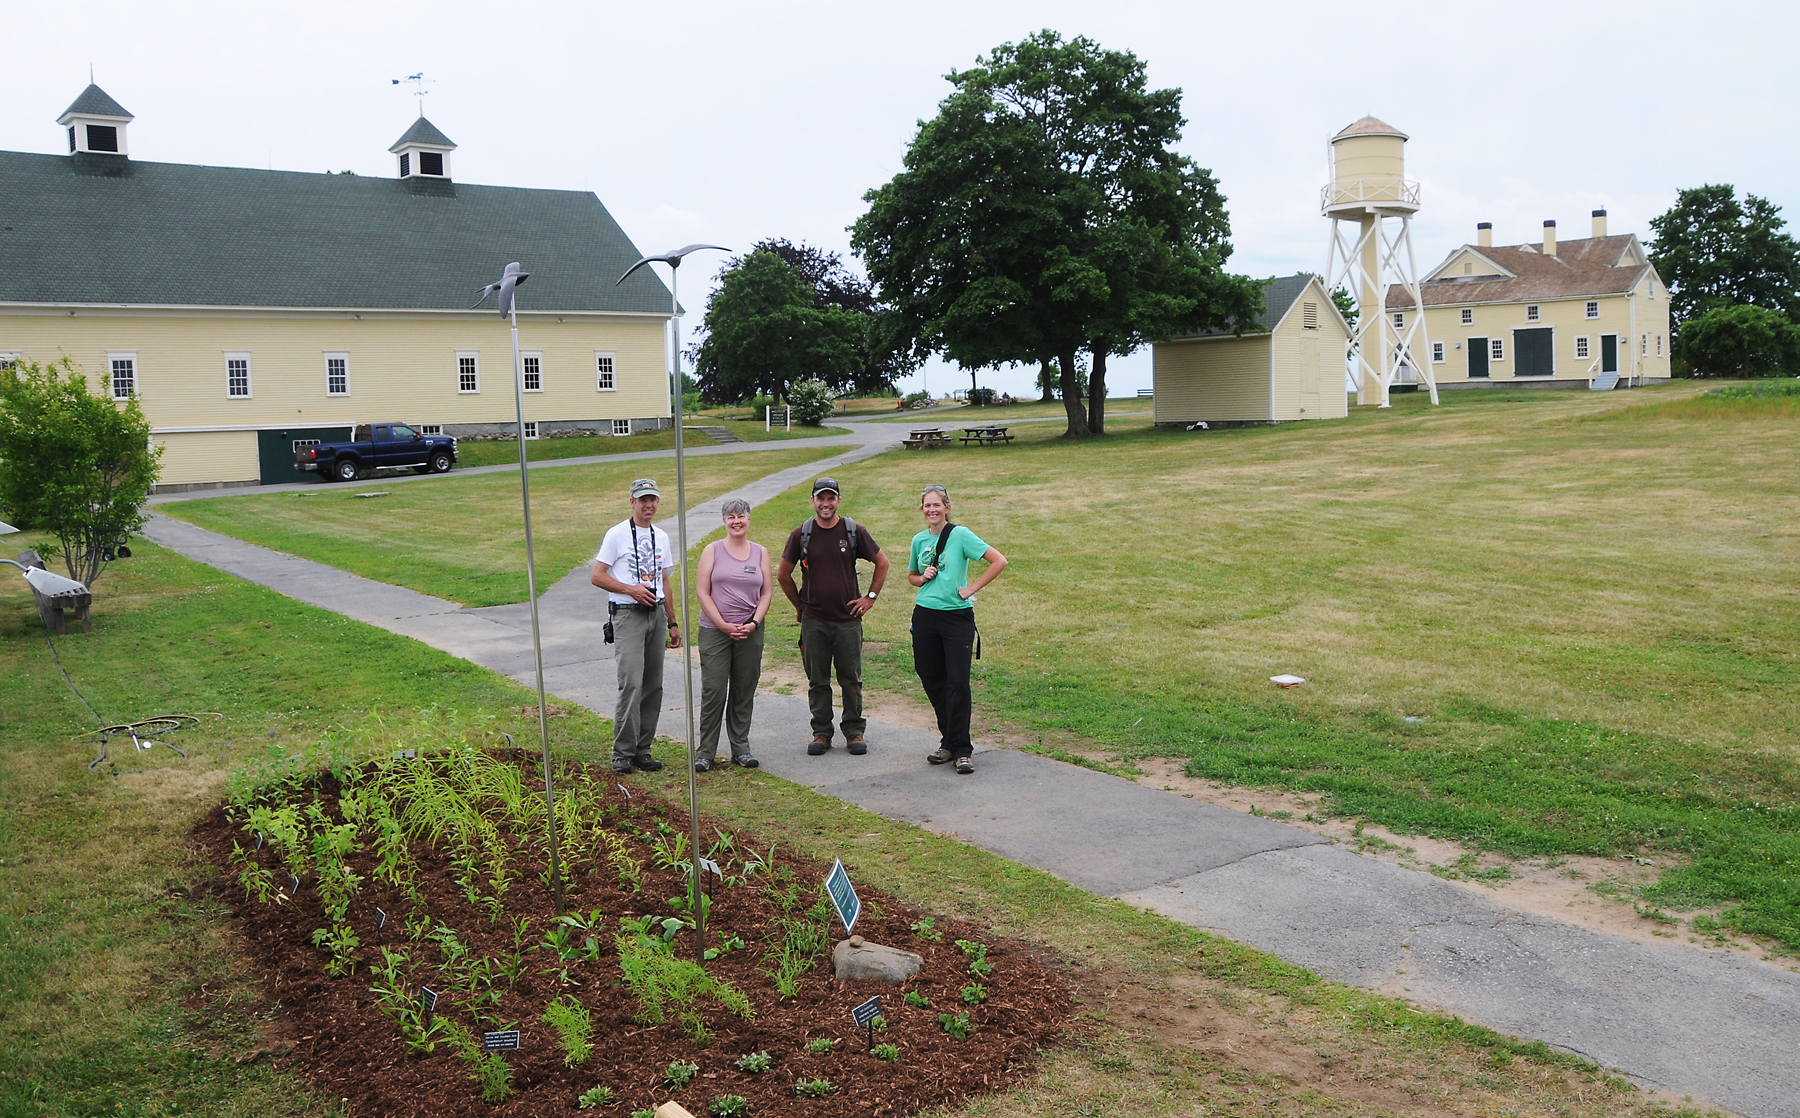 Newly installed Pollinator Garden with some of the crew who planted it on the Laudholm campus in June 2018. Photo © Allan Amioka